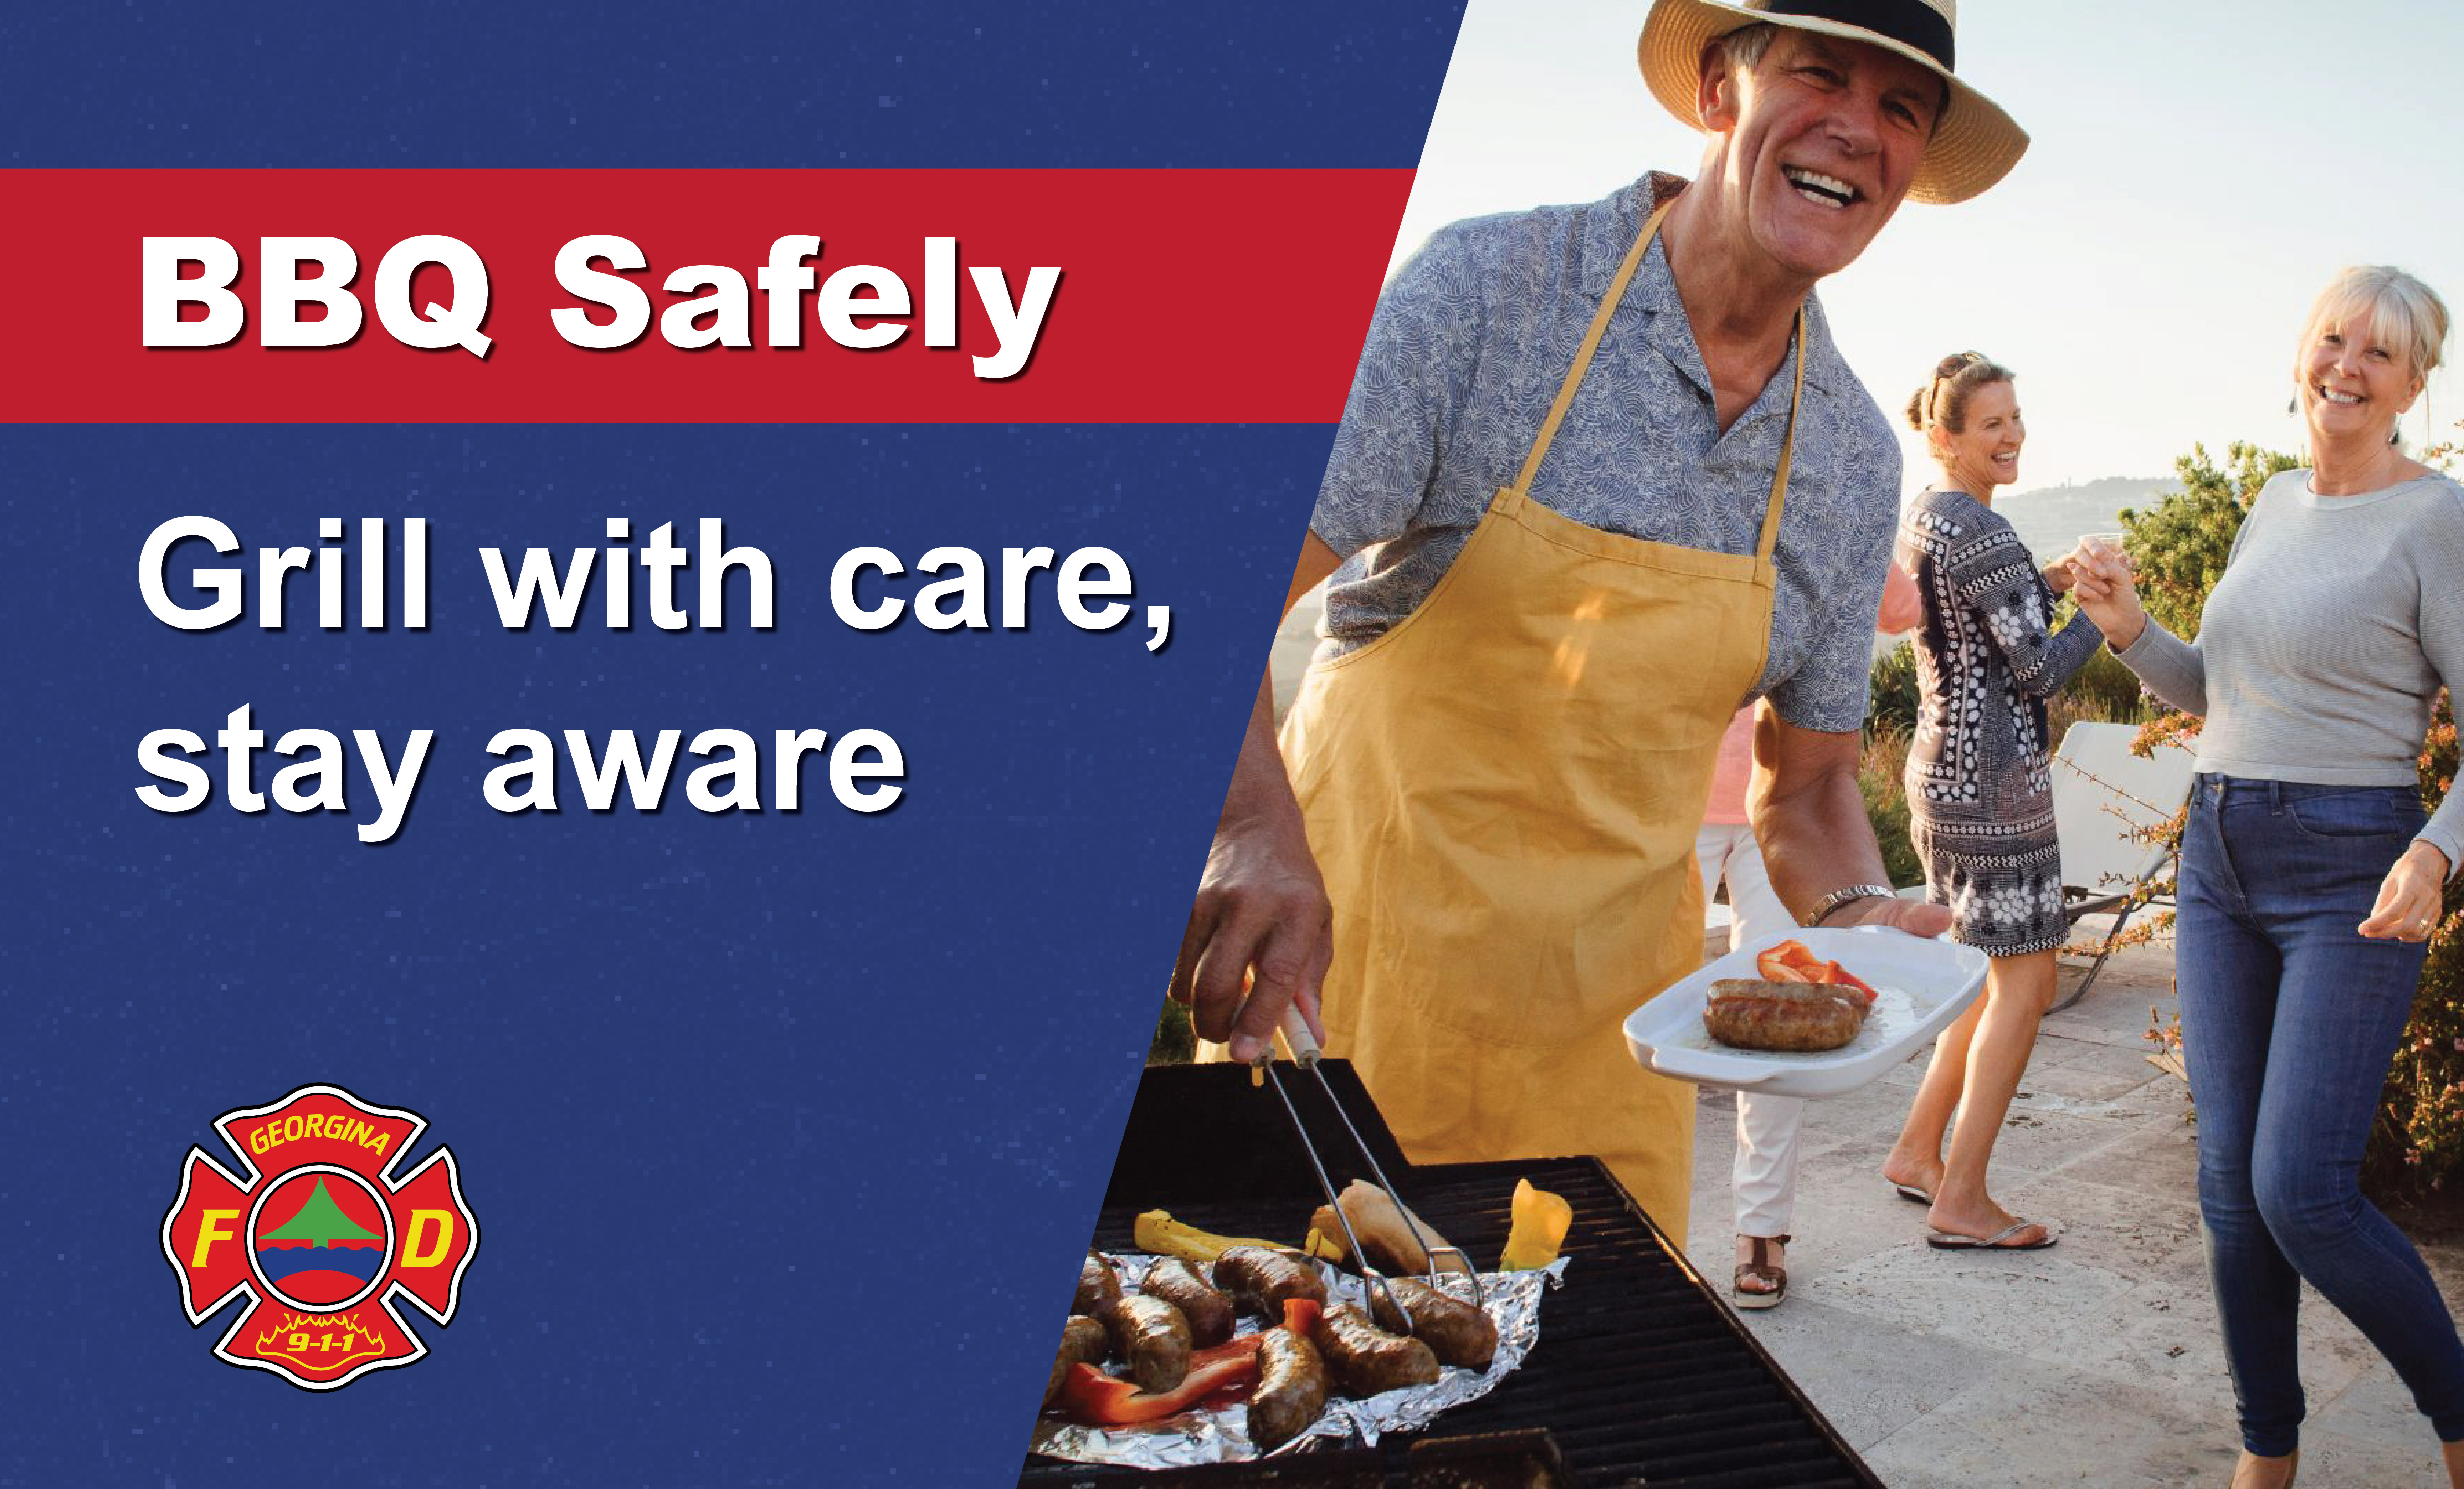 three people on a patio in front of a bbq with food on it with the words BBQ Safely Grill with care, stay aware